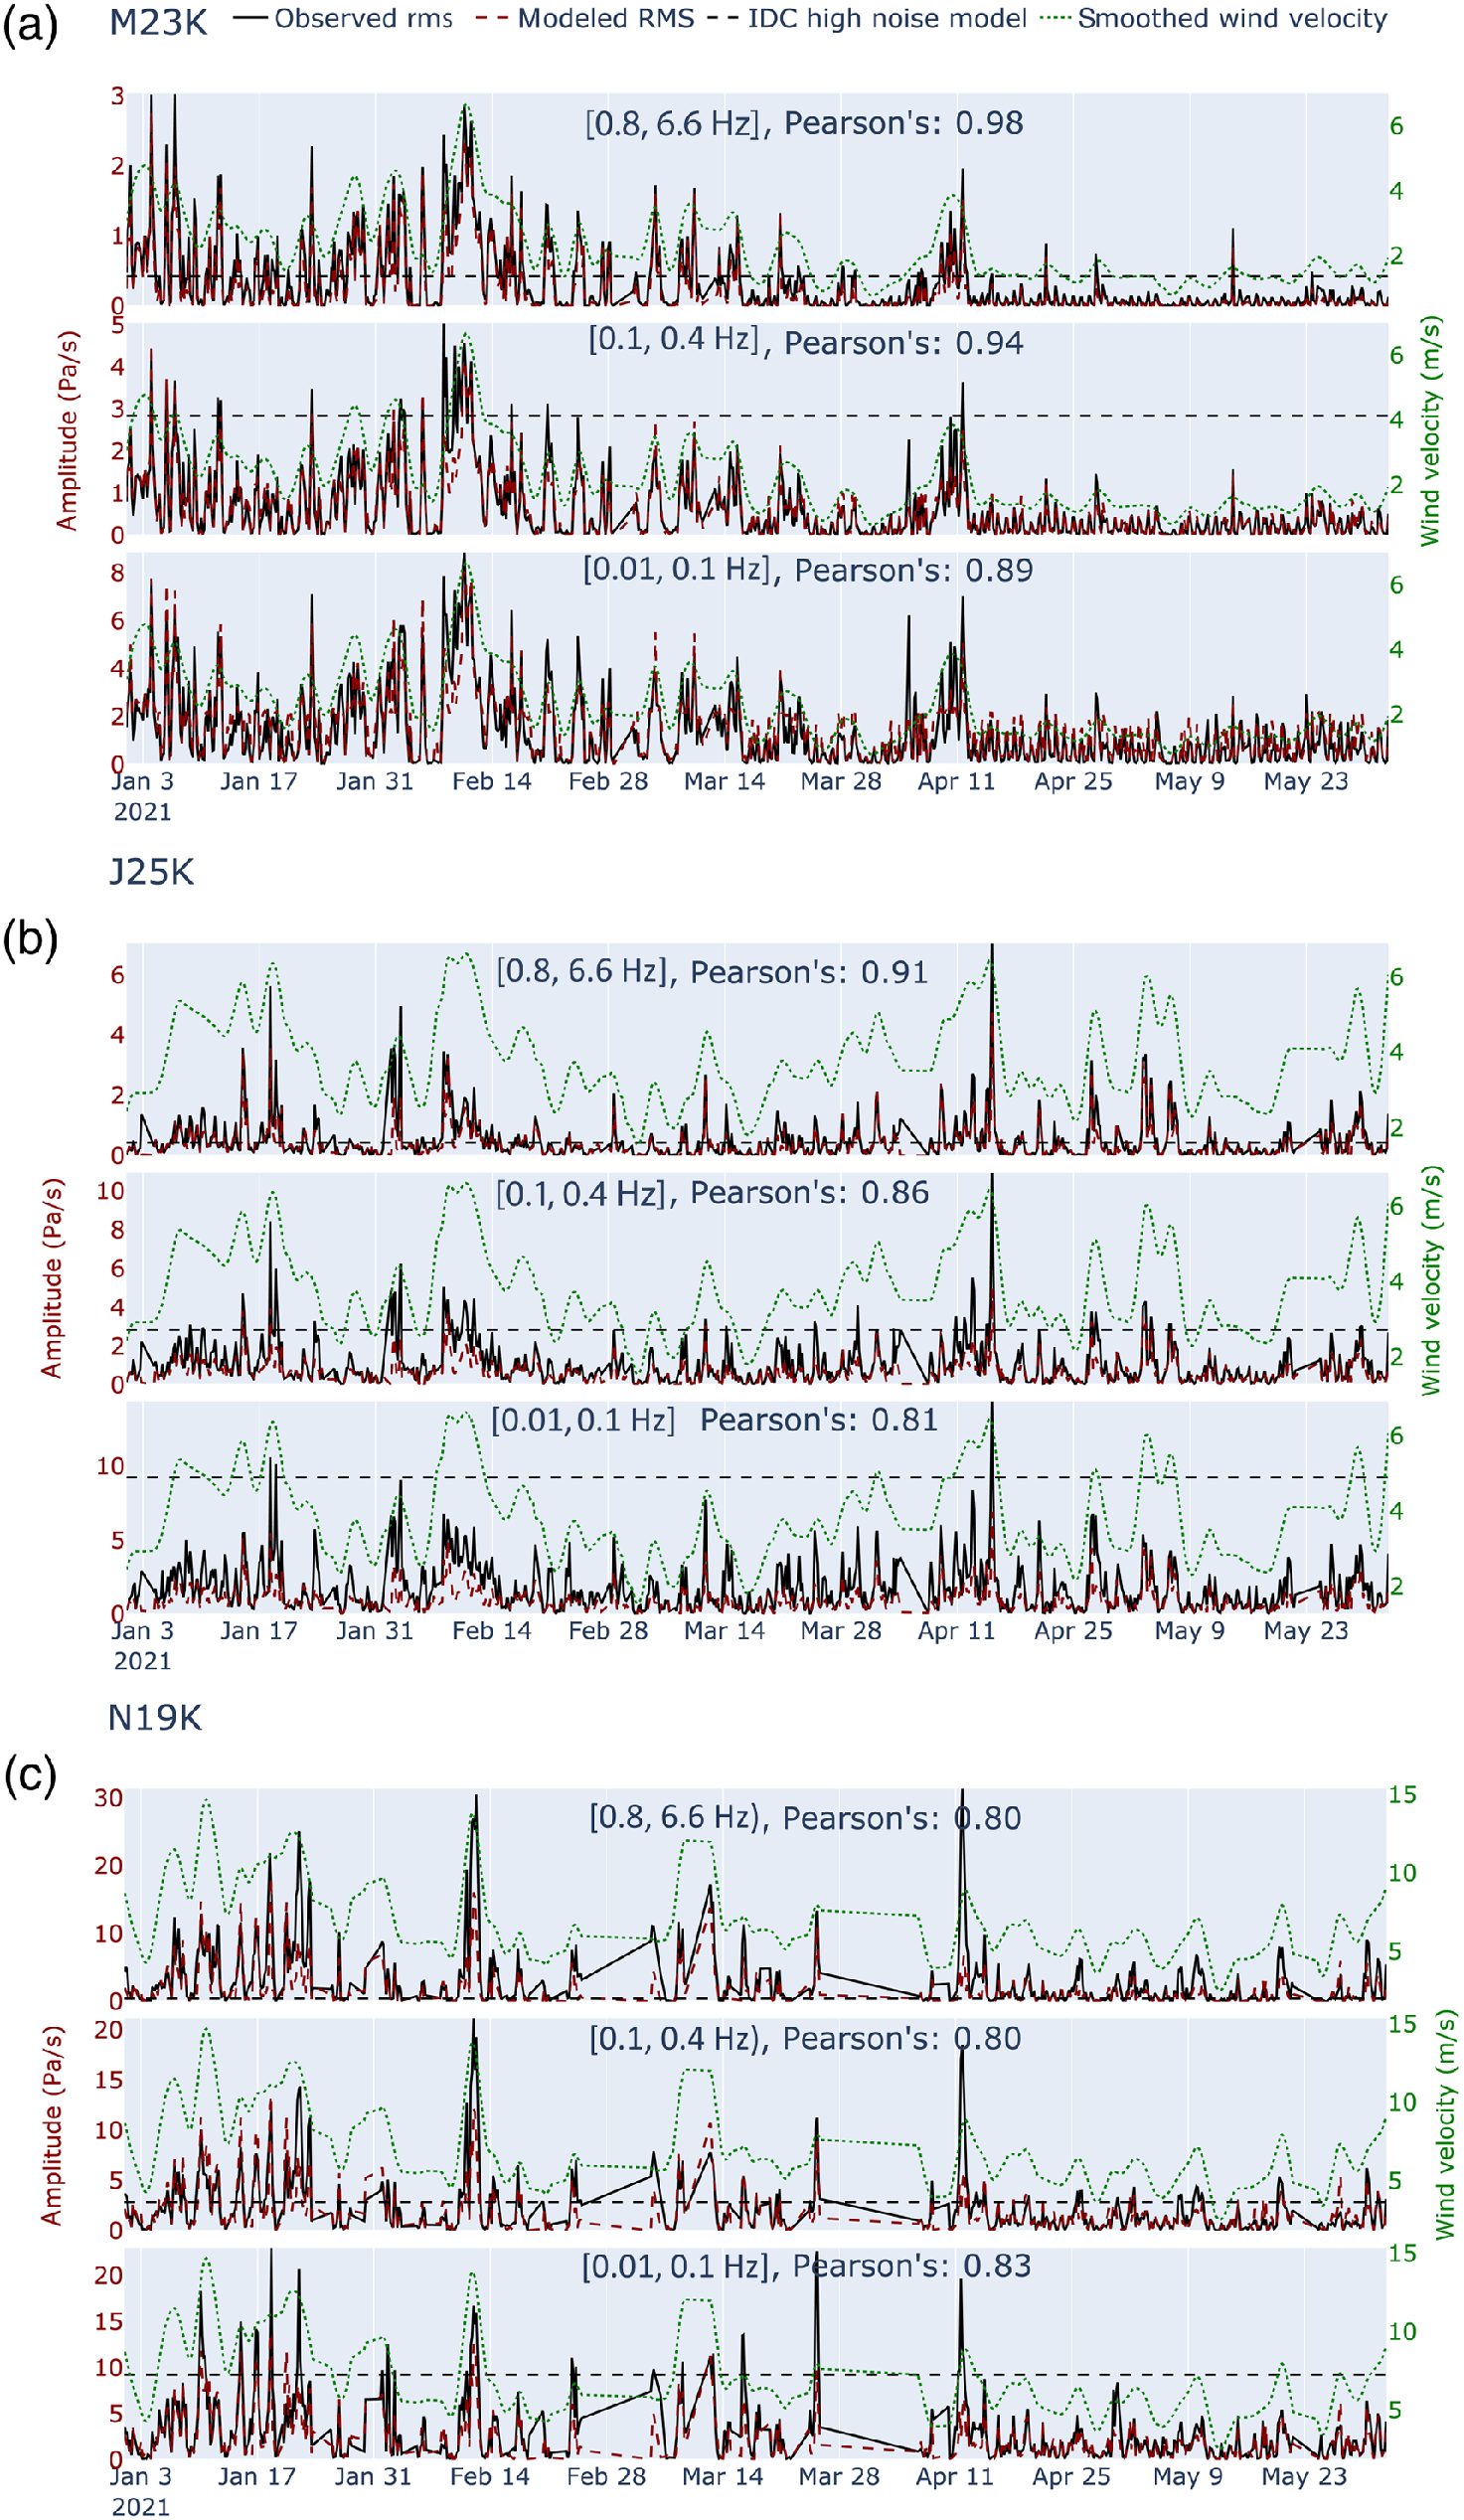 Comparison of observed (solid black lines) and modeled (dashed red lines) rms values at three AK infrasound stations. (a) M23K, a sheltered site. (b) J25K, a partially sheltered site. (c) N19K, an exposed site. Green line shows filtered hourly wind speed. Each station subpanel shows results for a different passband. The rms amplitude from the IDC noise model for each band is indicated by a dashed horizontal black line (if on scale).